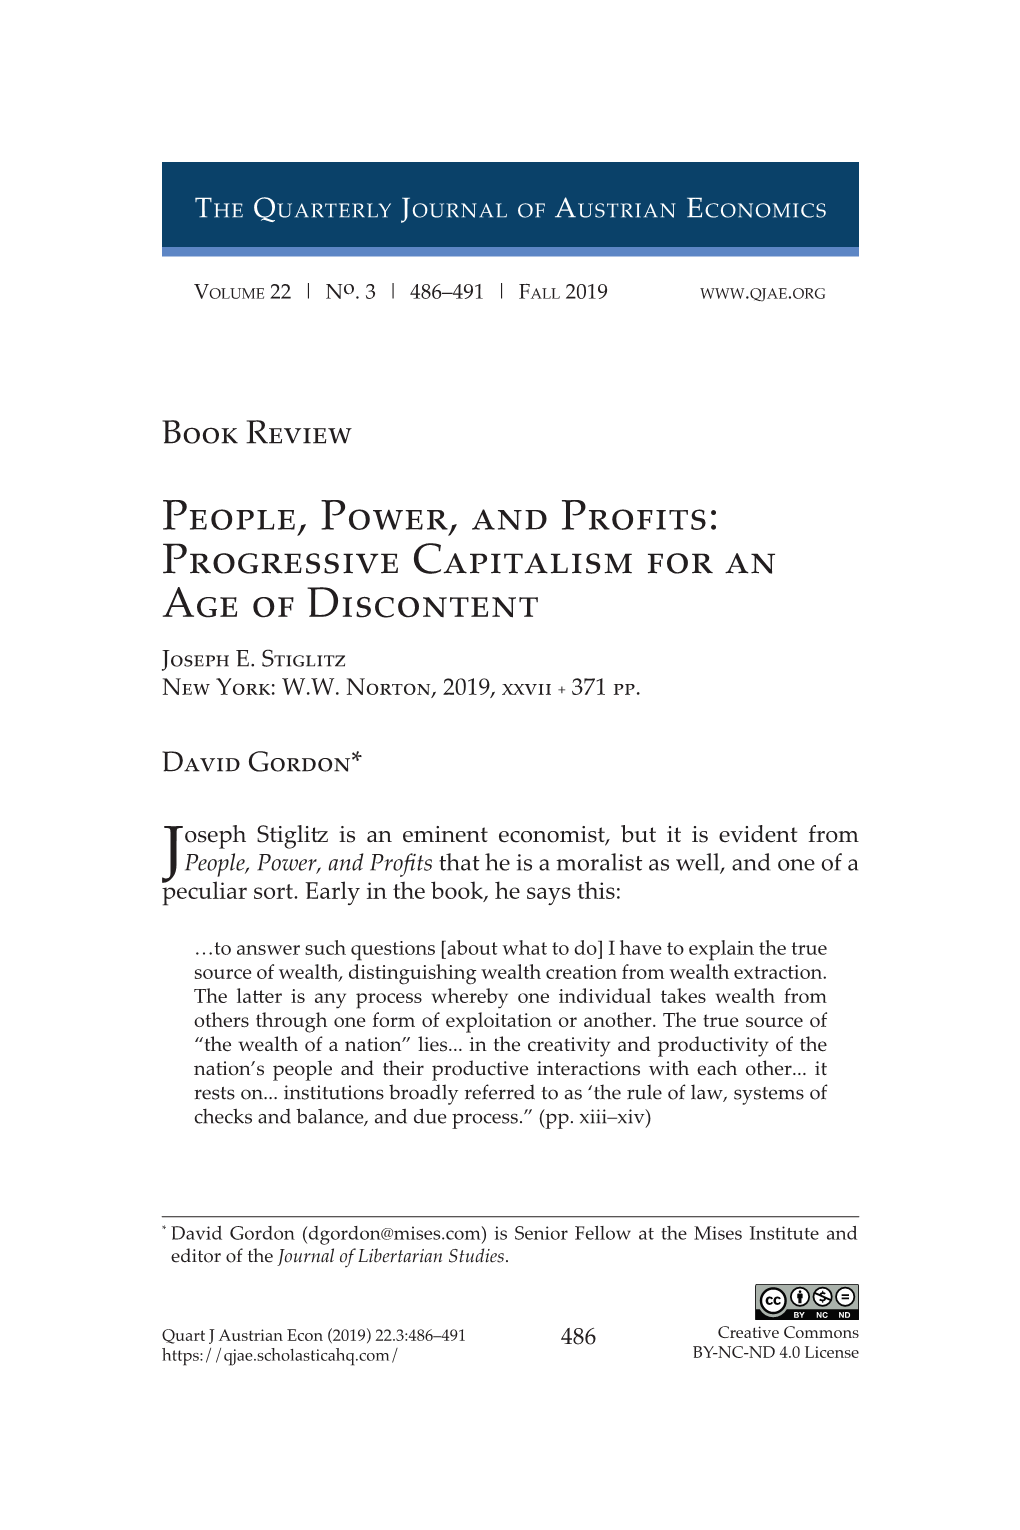 People, Power, and Profits: Progressive Capitalism for an Age of Discontent Joseph E